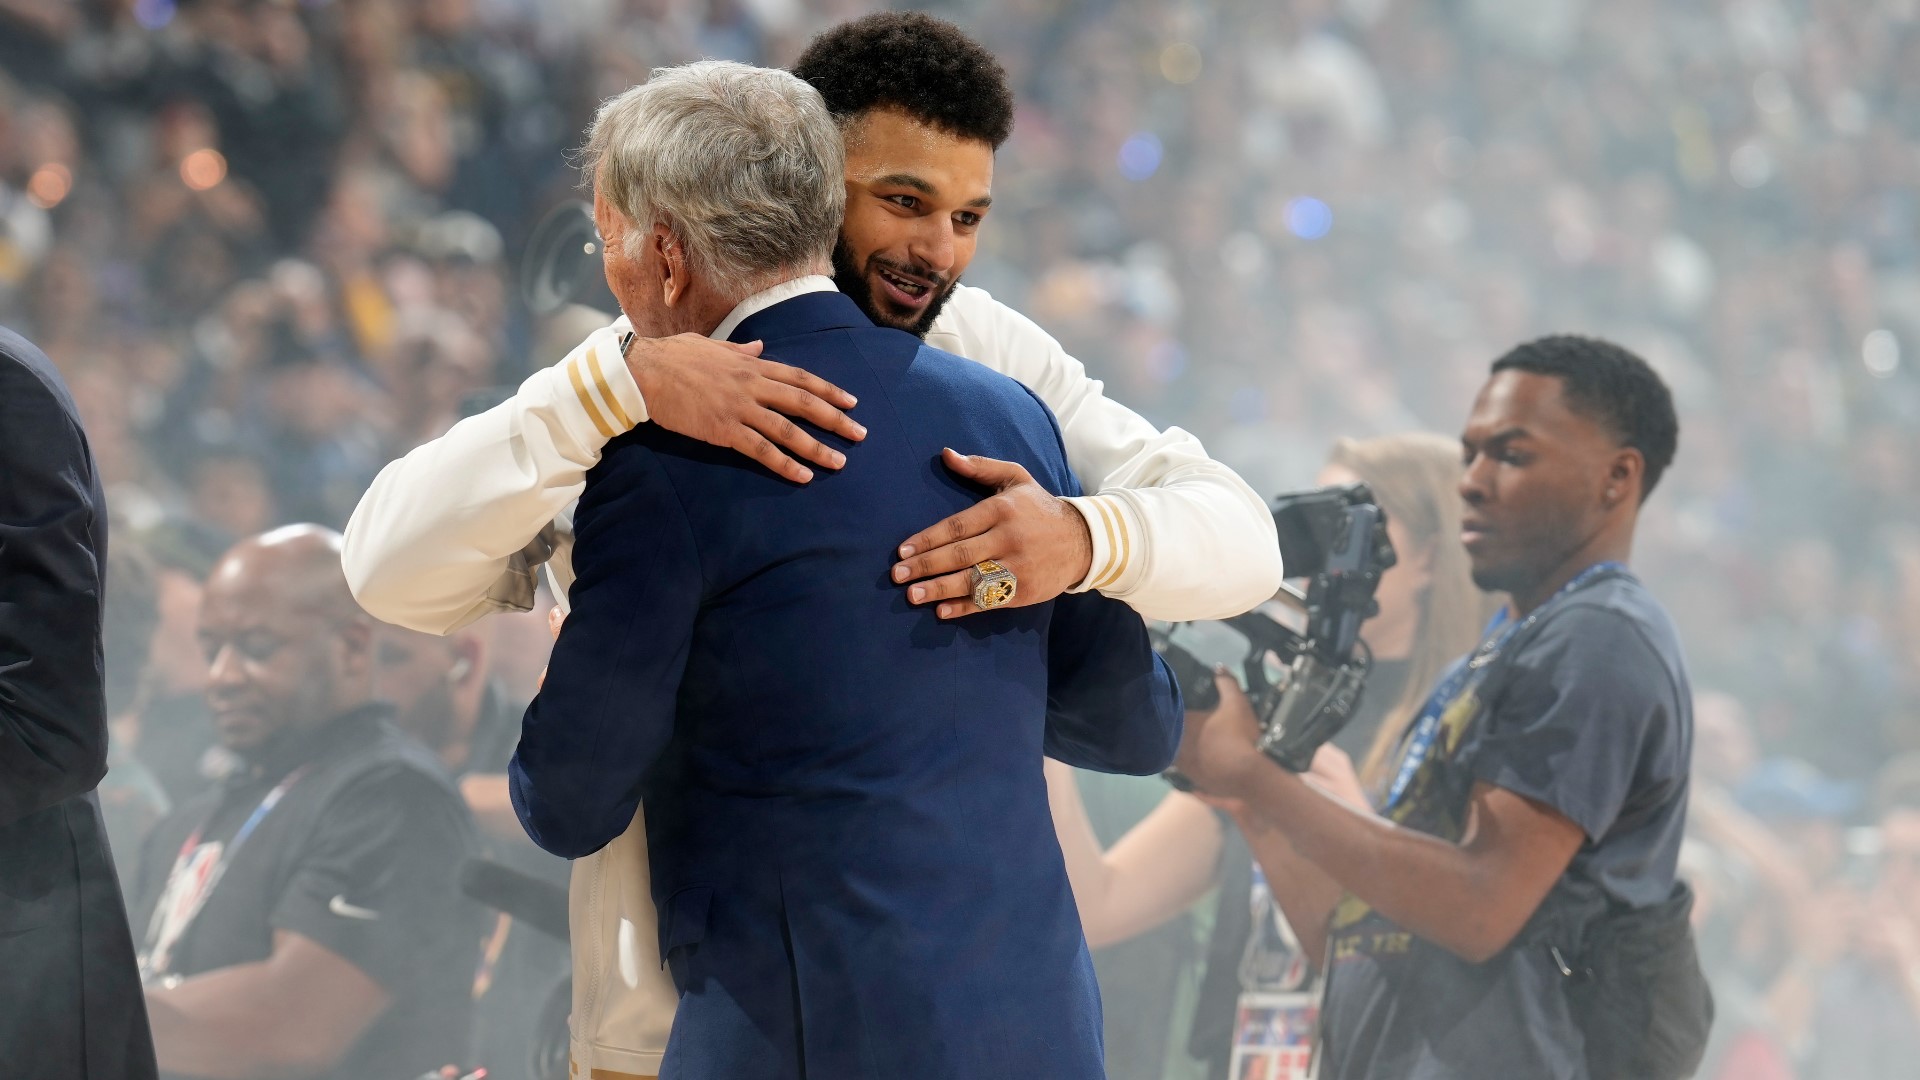 The Denver Nuggets raised their championship banner Tuesday night, then dropped the hammer on the Los Angeles Lakers with a 119-107 victory.